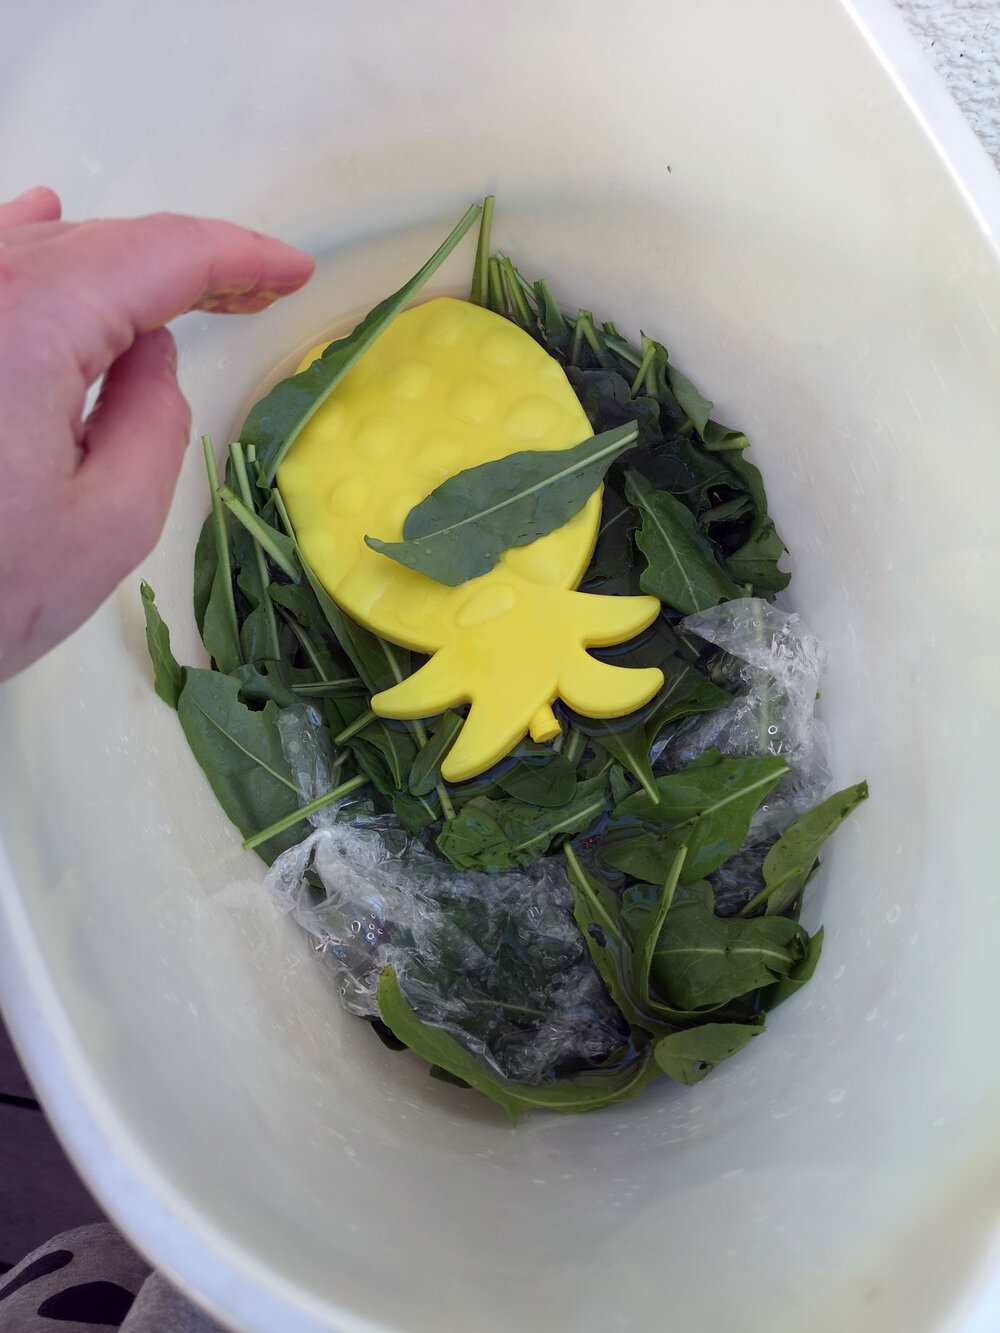 Ria-Burns-Knitwear-Homegrown-Woad-Fresh-Leaf-Extraction-Leaves-In-Ice-Water.jpg